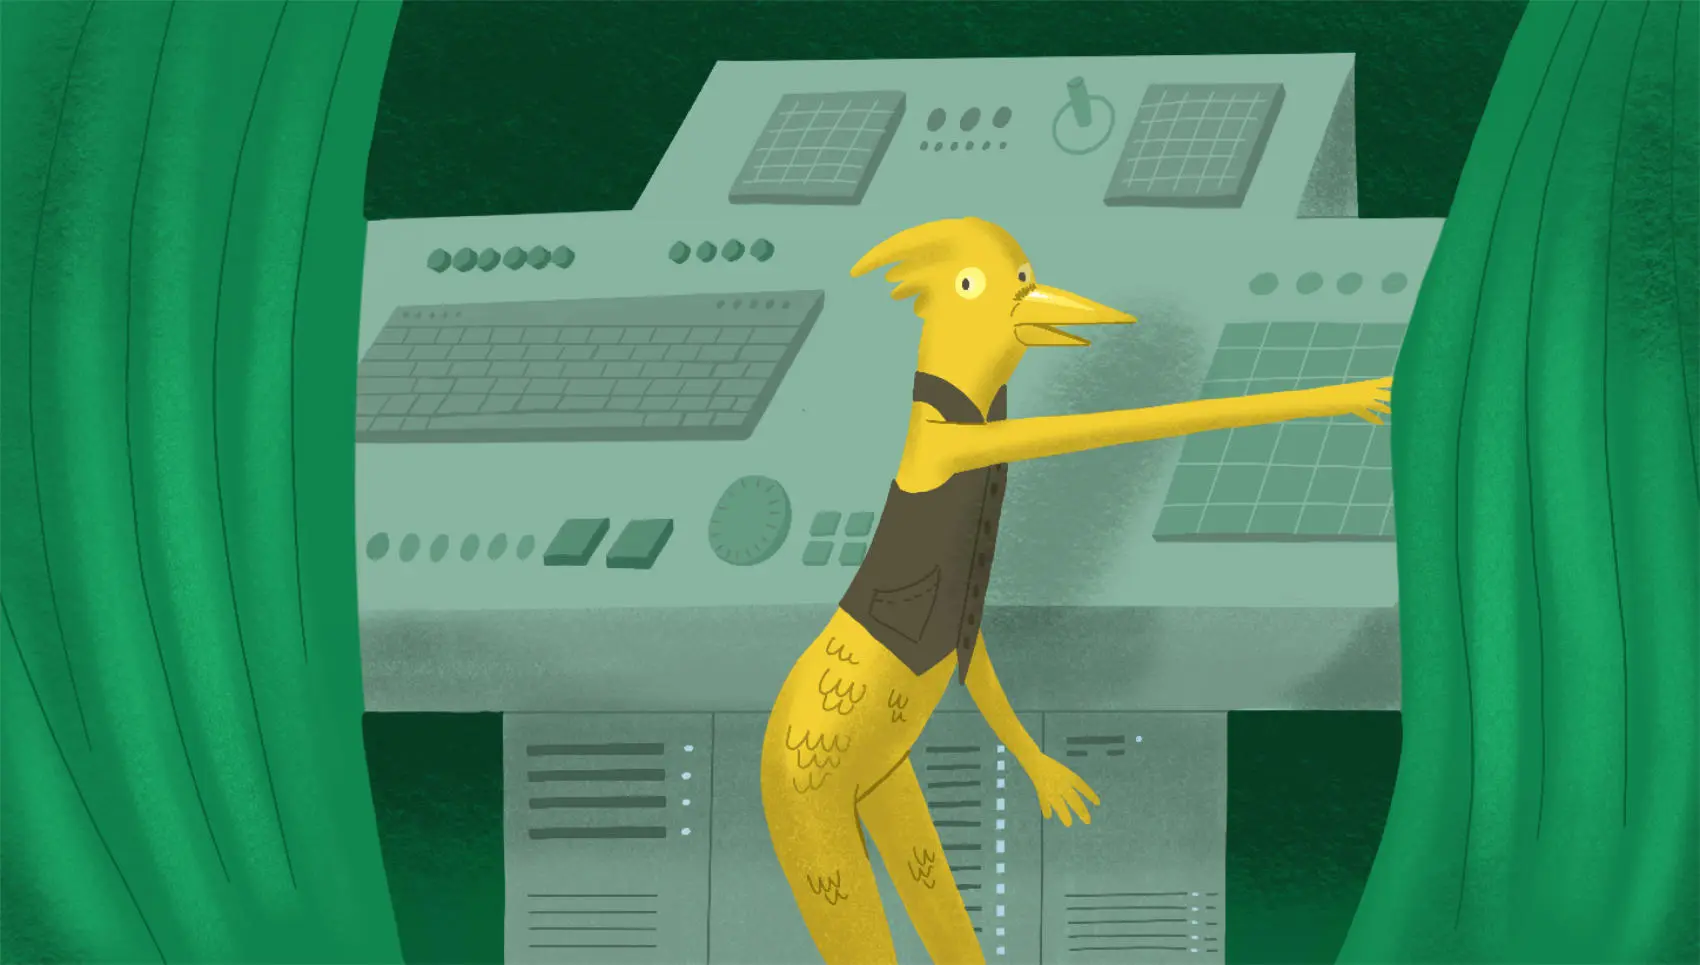 An anthropomorphic bird wearing a vest, shocked to be revealed, standing alongside a large computer-like console, by the dramatic opening of emerald-green curtains. It's reminiscent of The Wizard of Oz but with slightly less-steampunk machinery. And, you know, a bird.